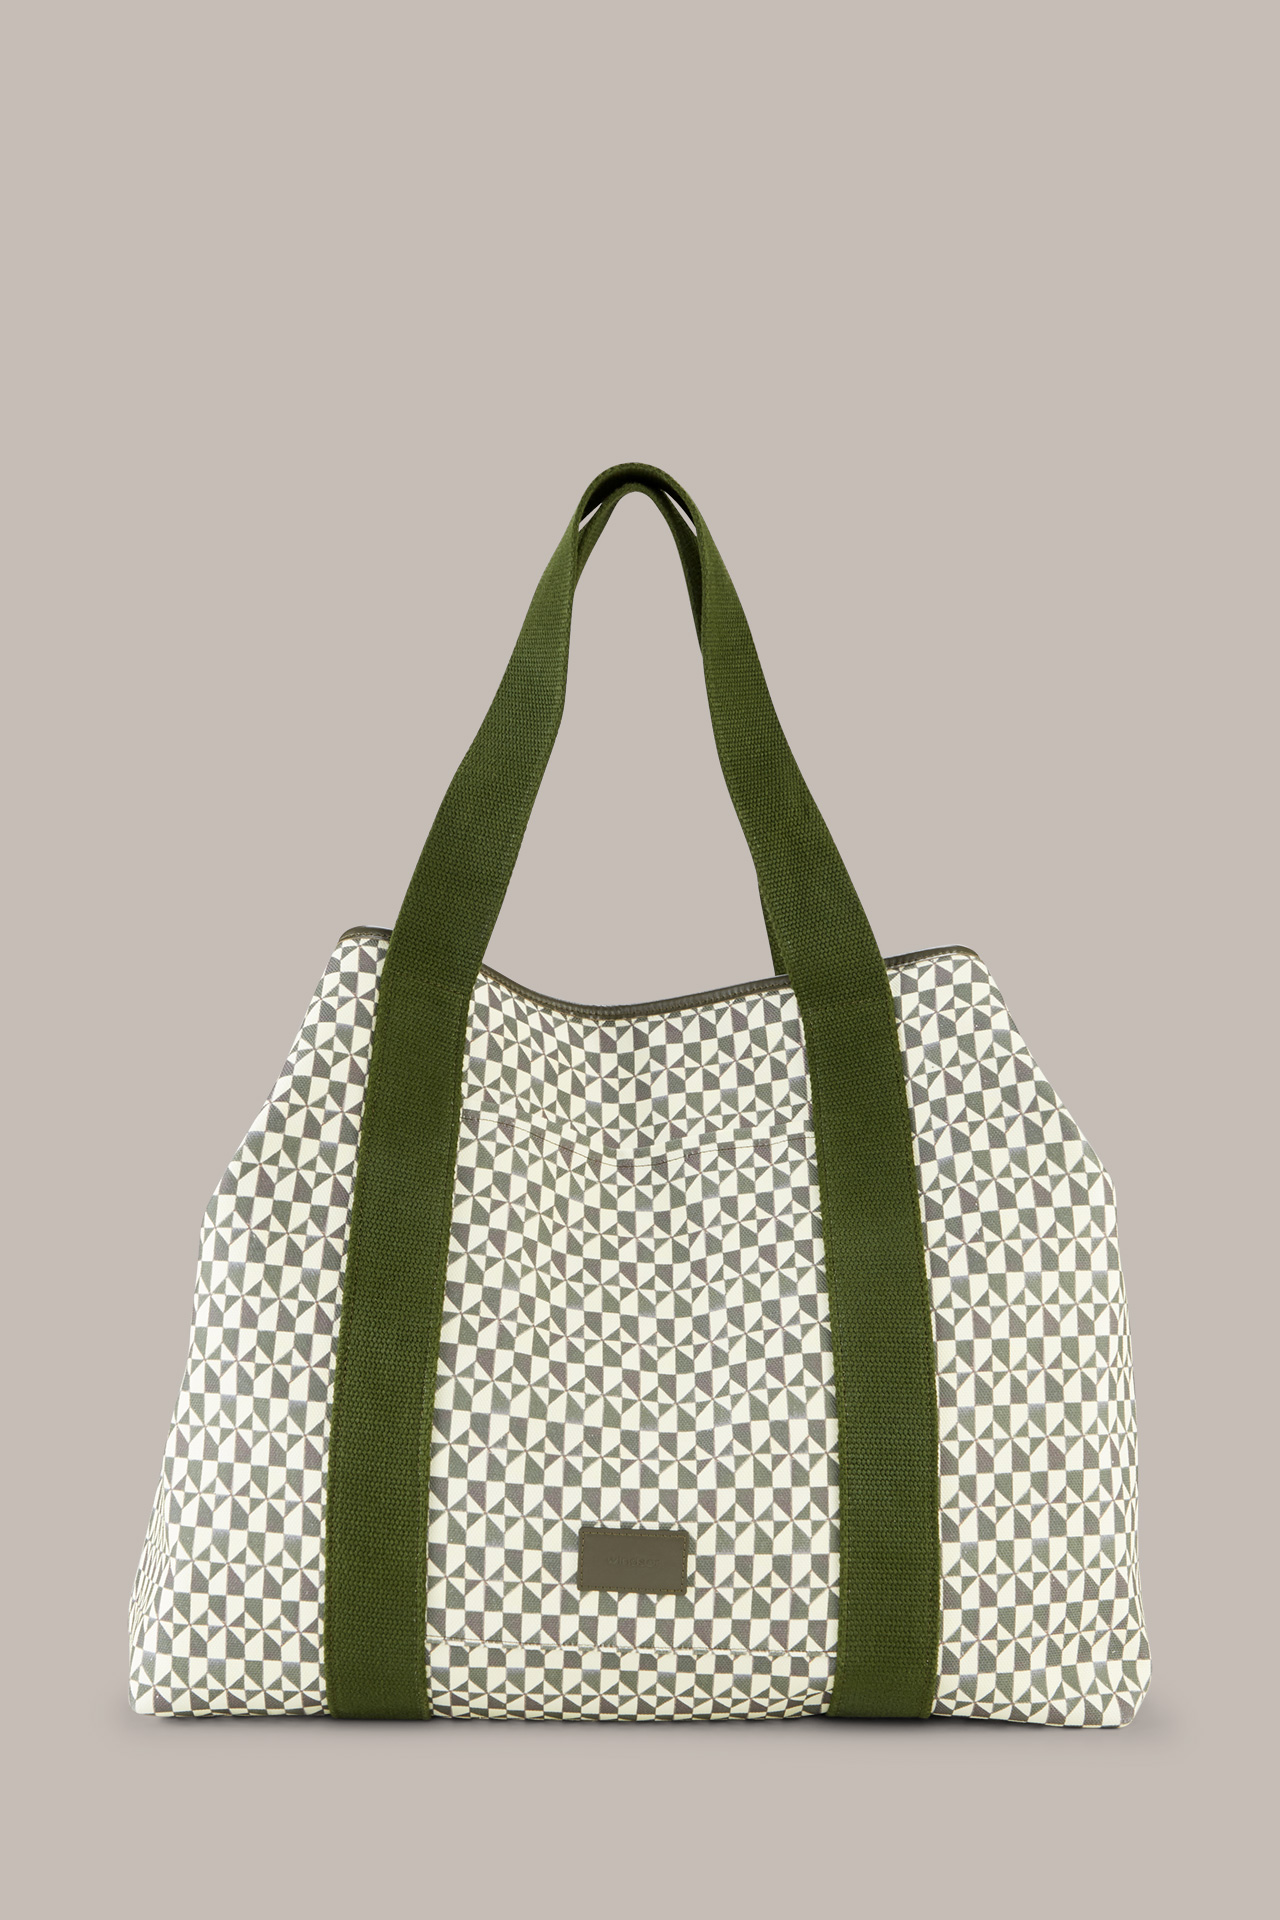 Canvas Shopper in Olive and Ecru Patterned